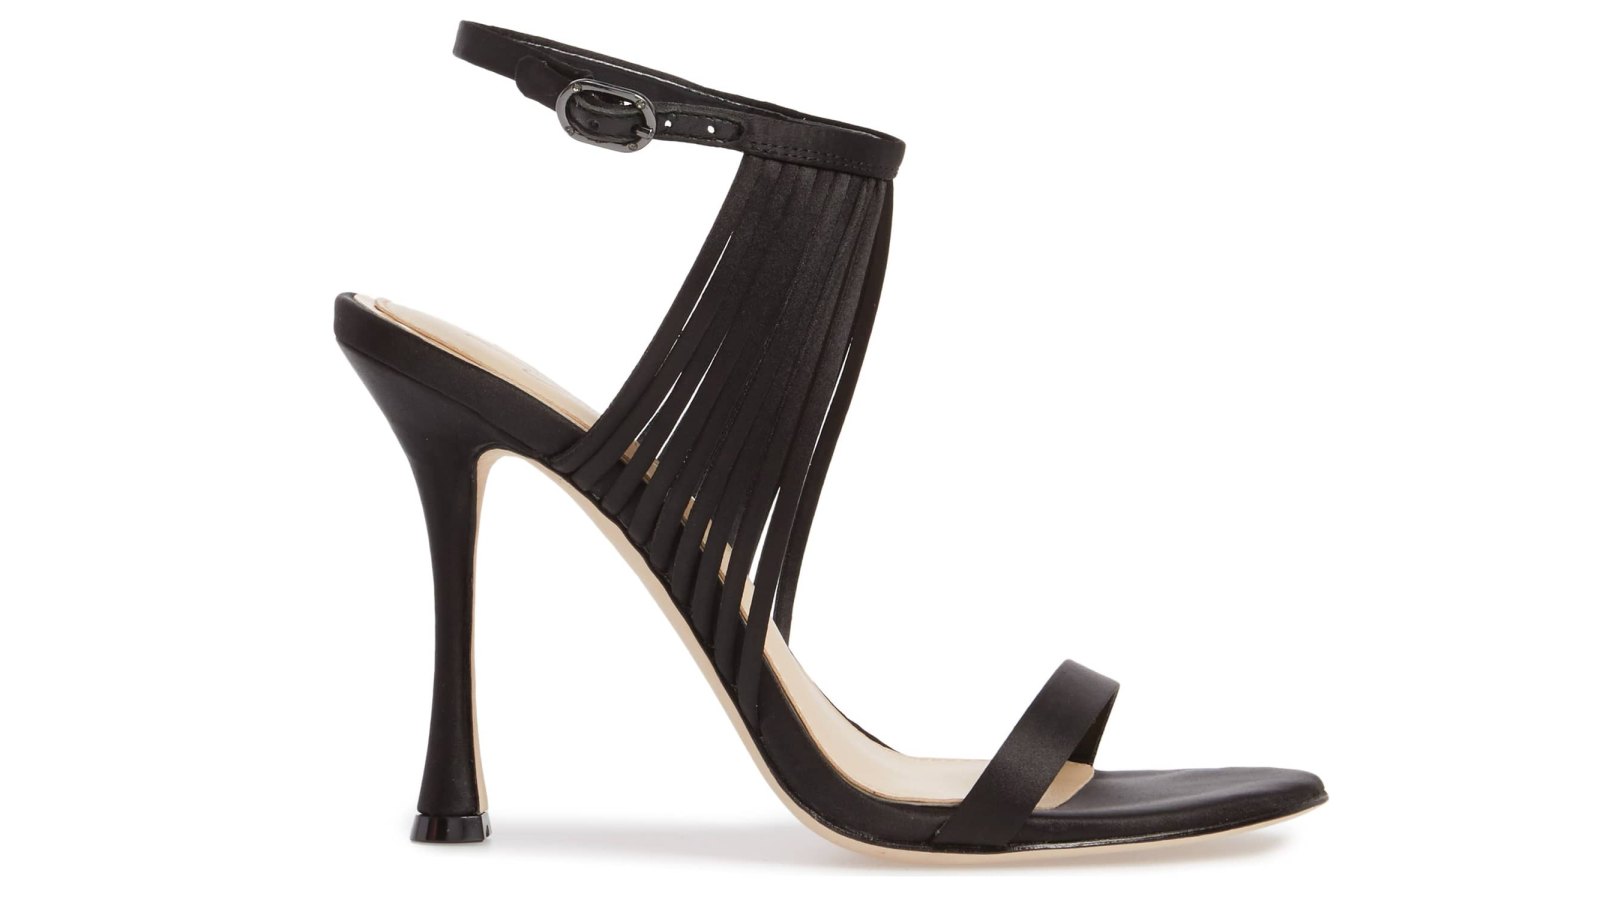 Shop These Vince Camuto Satin Heels on Sale at Nordstrom | Us Weekly